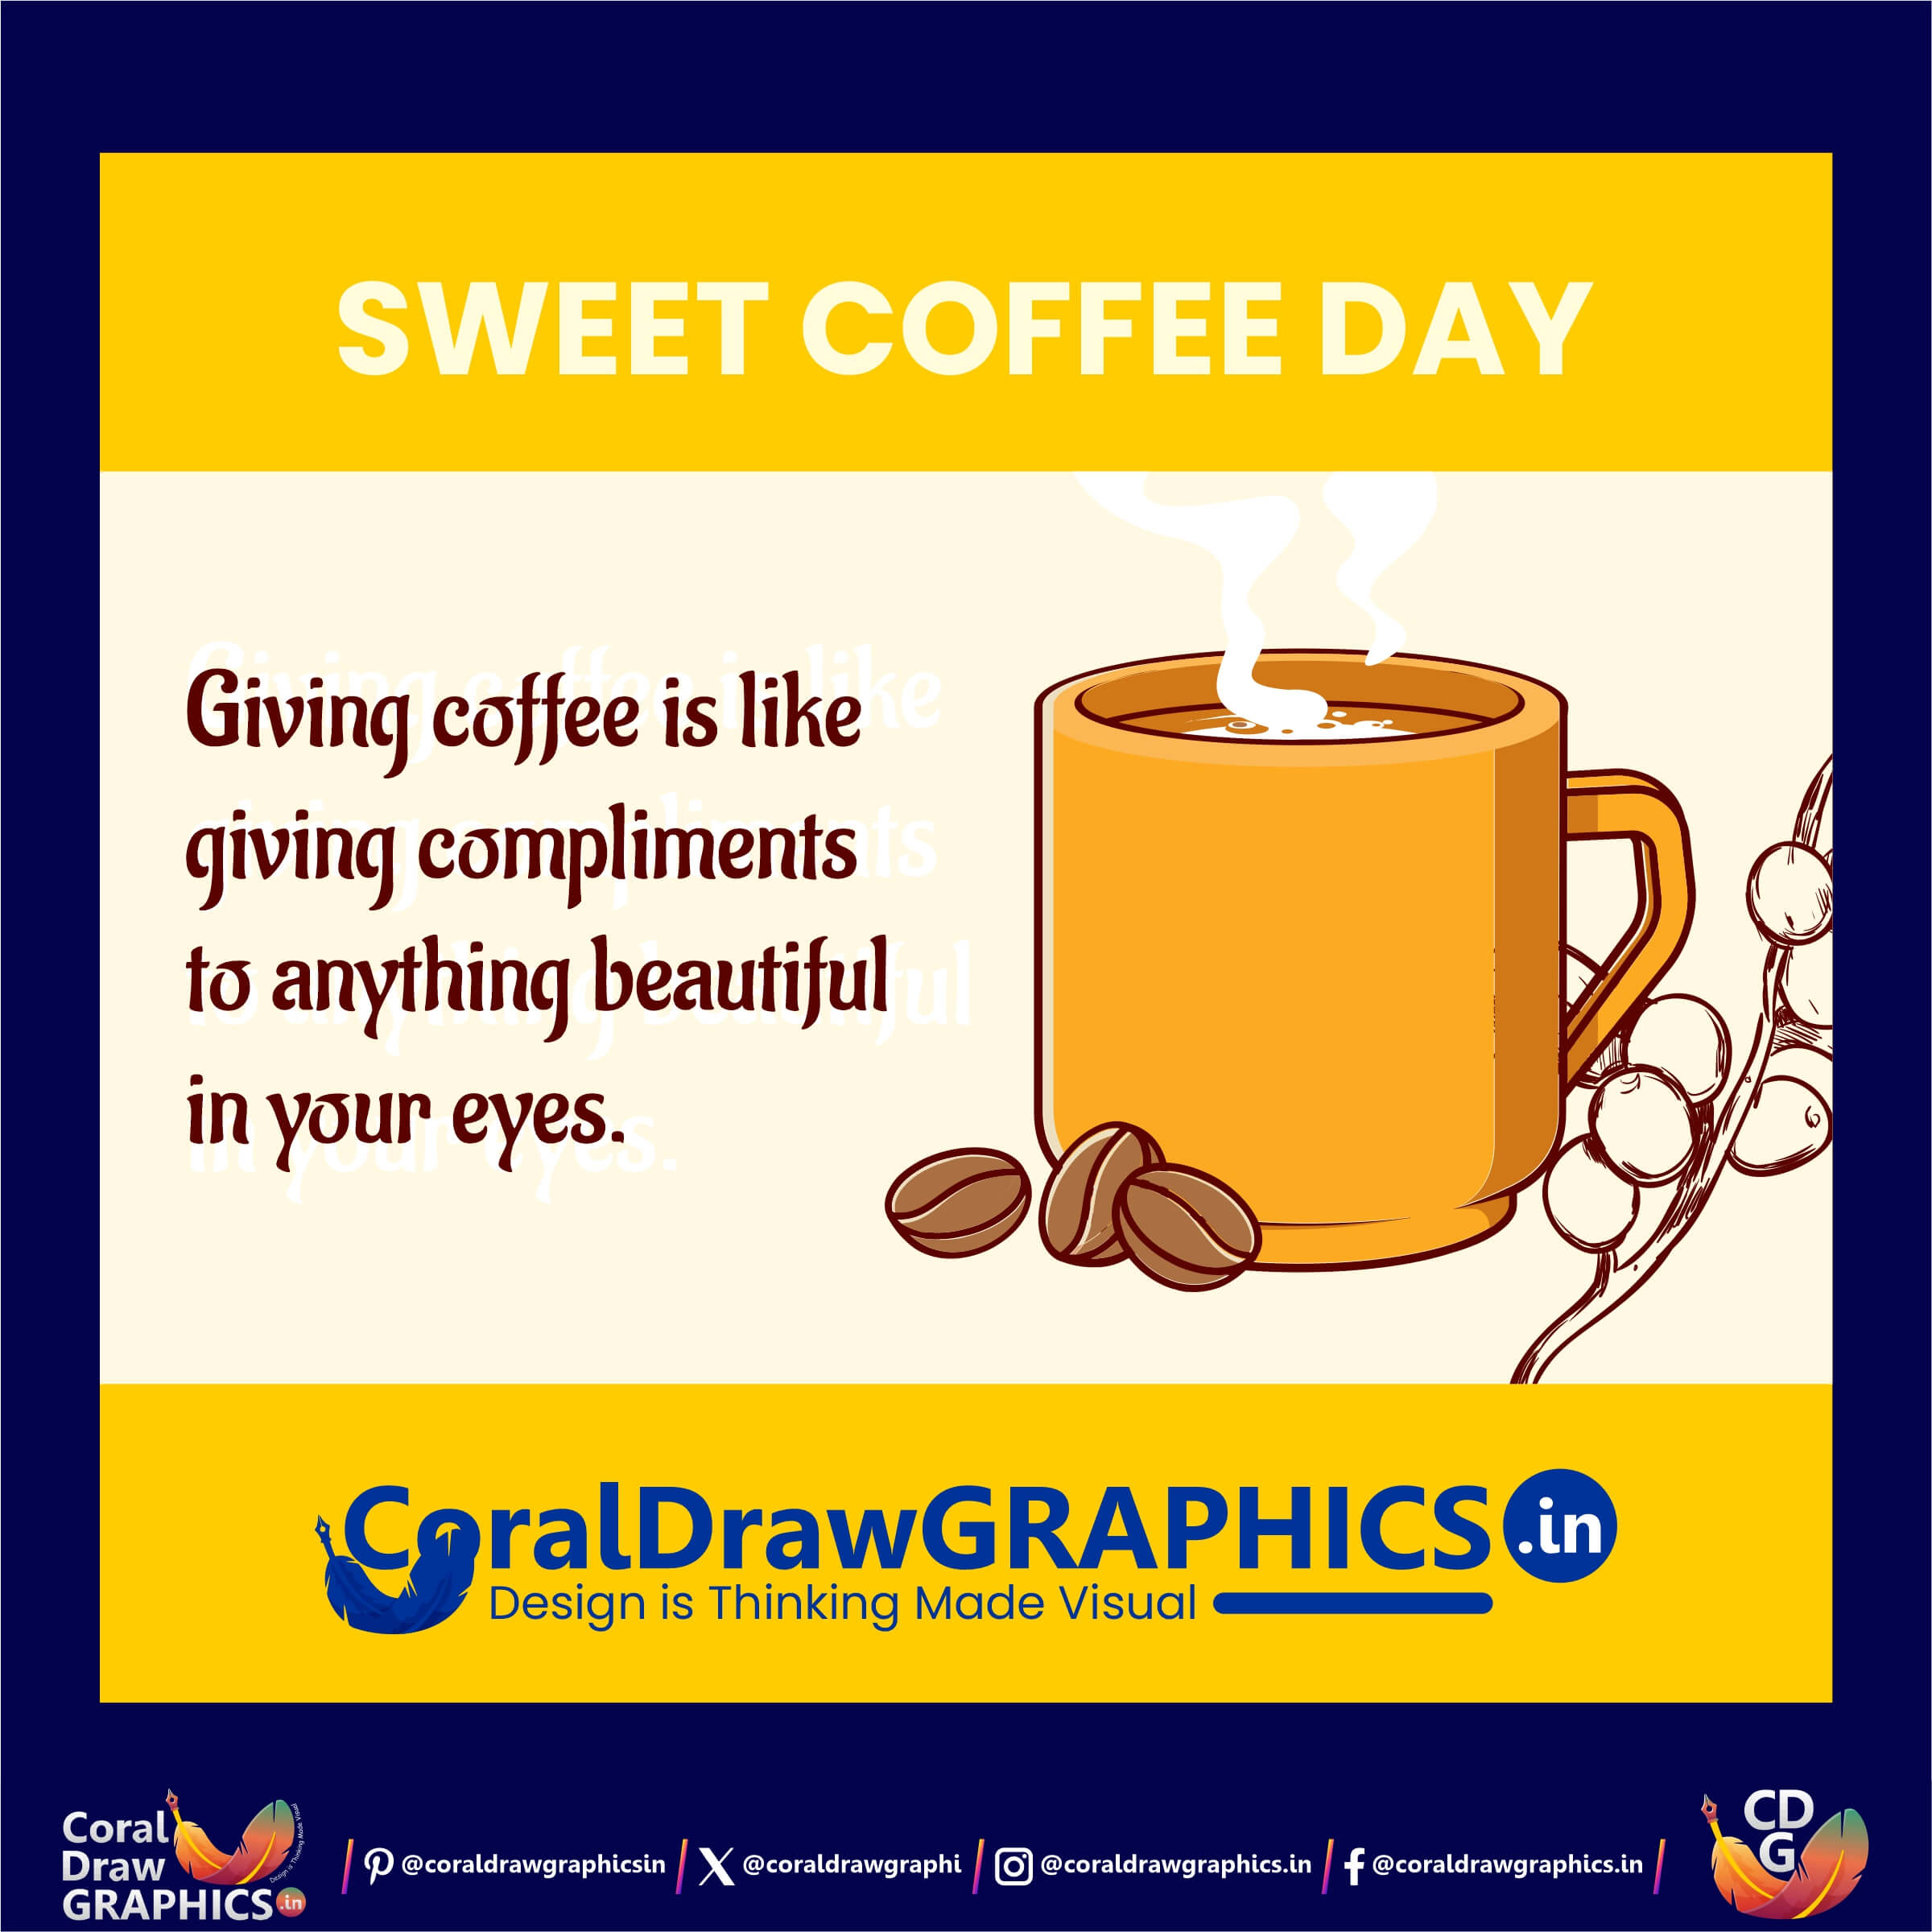 Sweet Coffee Day Social Post Creative Fee Download CDR